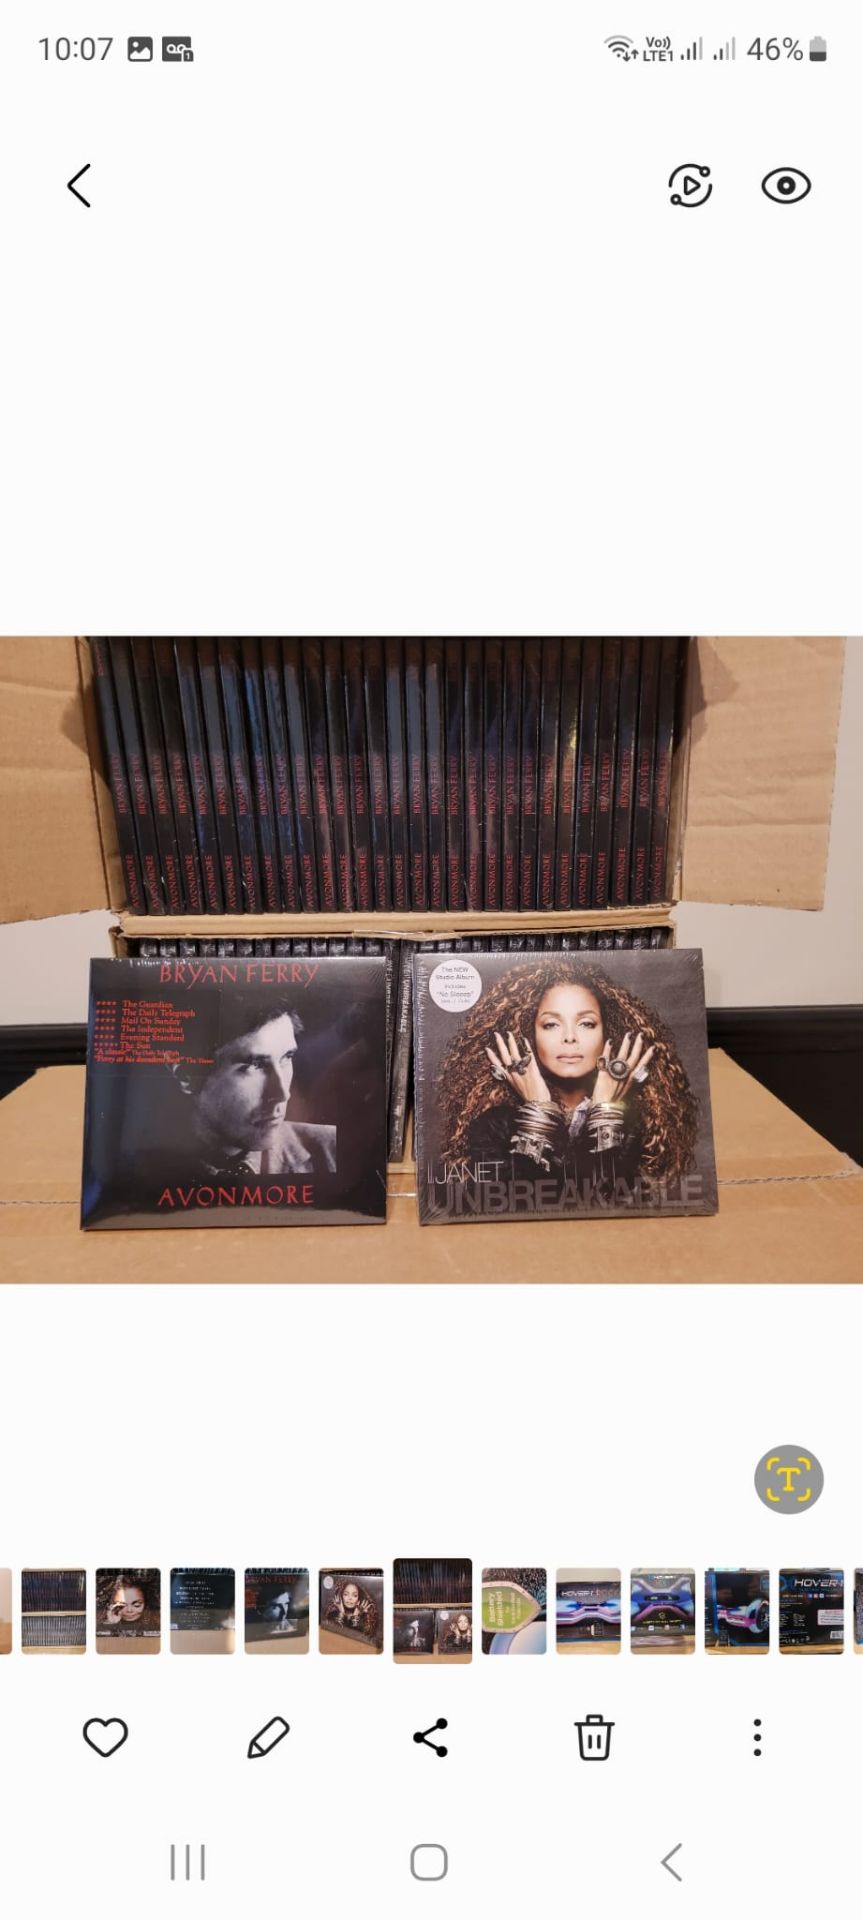 CD Janet Jackson and Brain Ferry x 6000 - Image 6 of 10